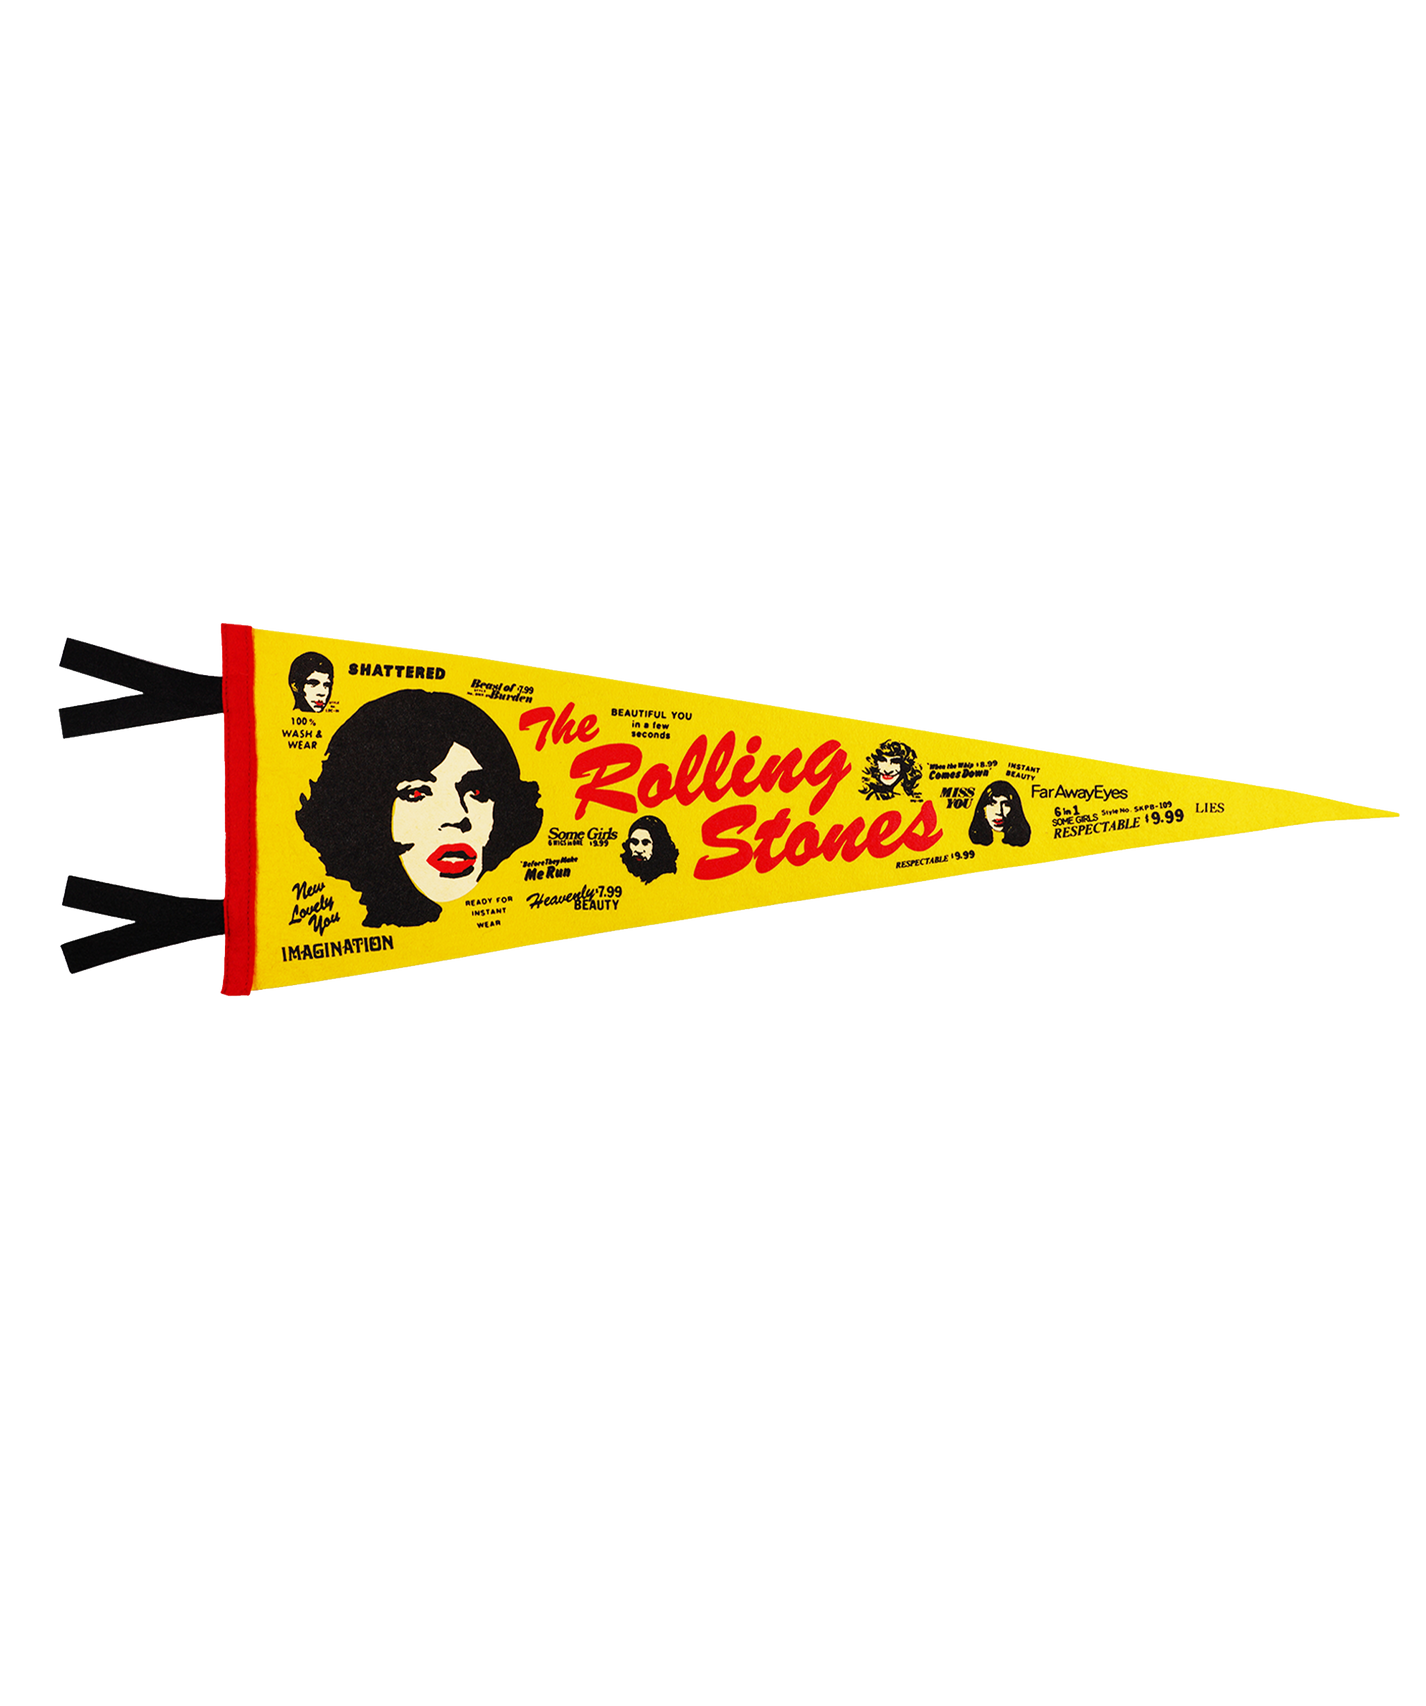 THE ROLLING STONES Some Girls Pennant by Oxford Pennant